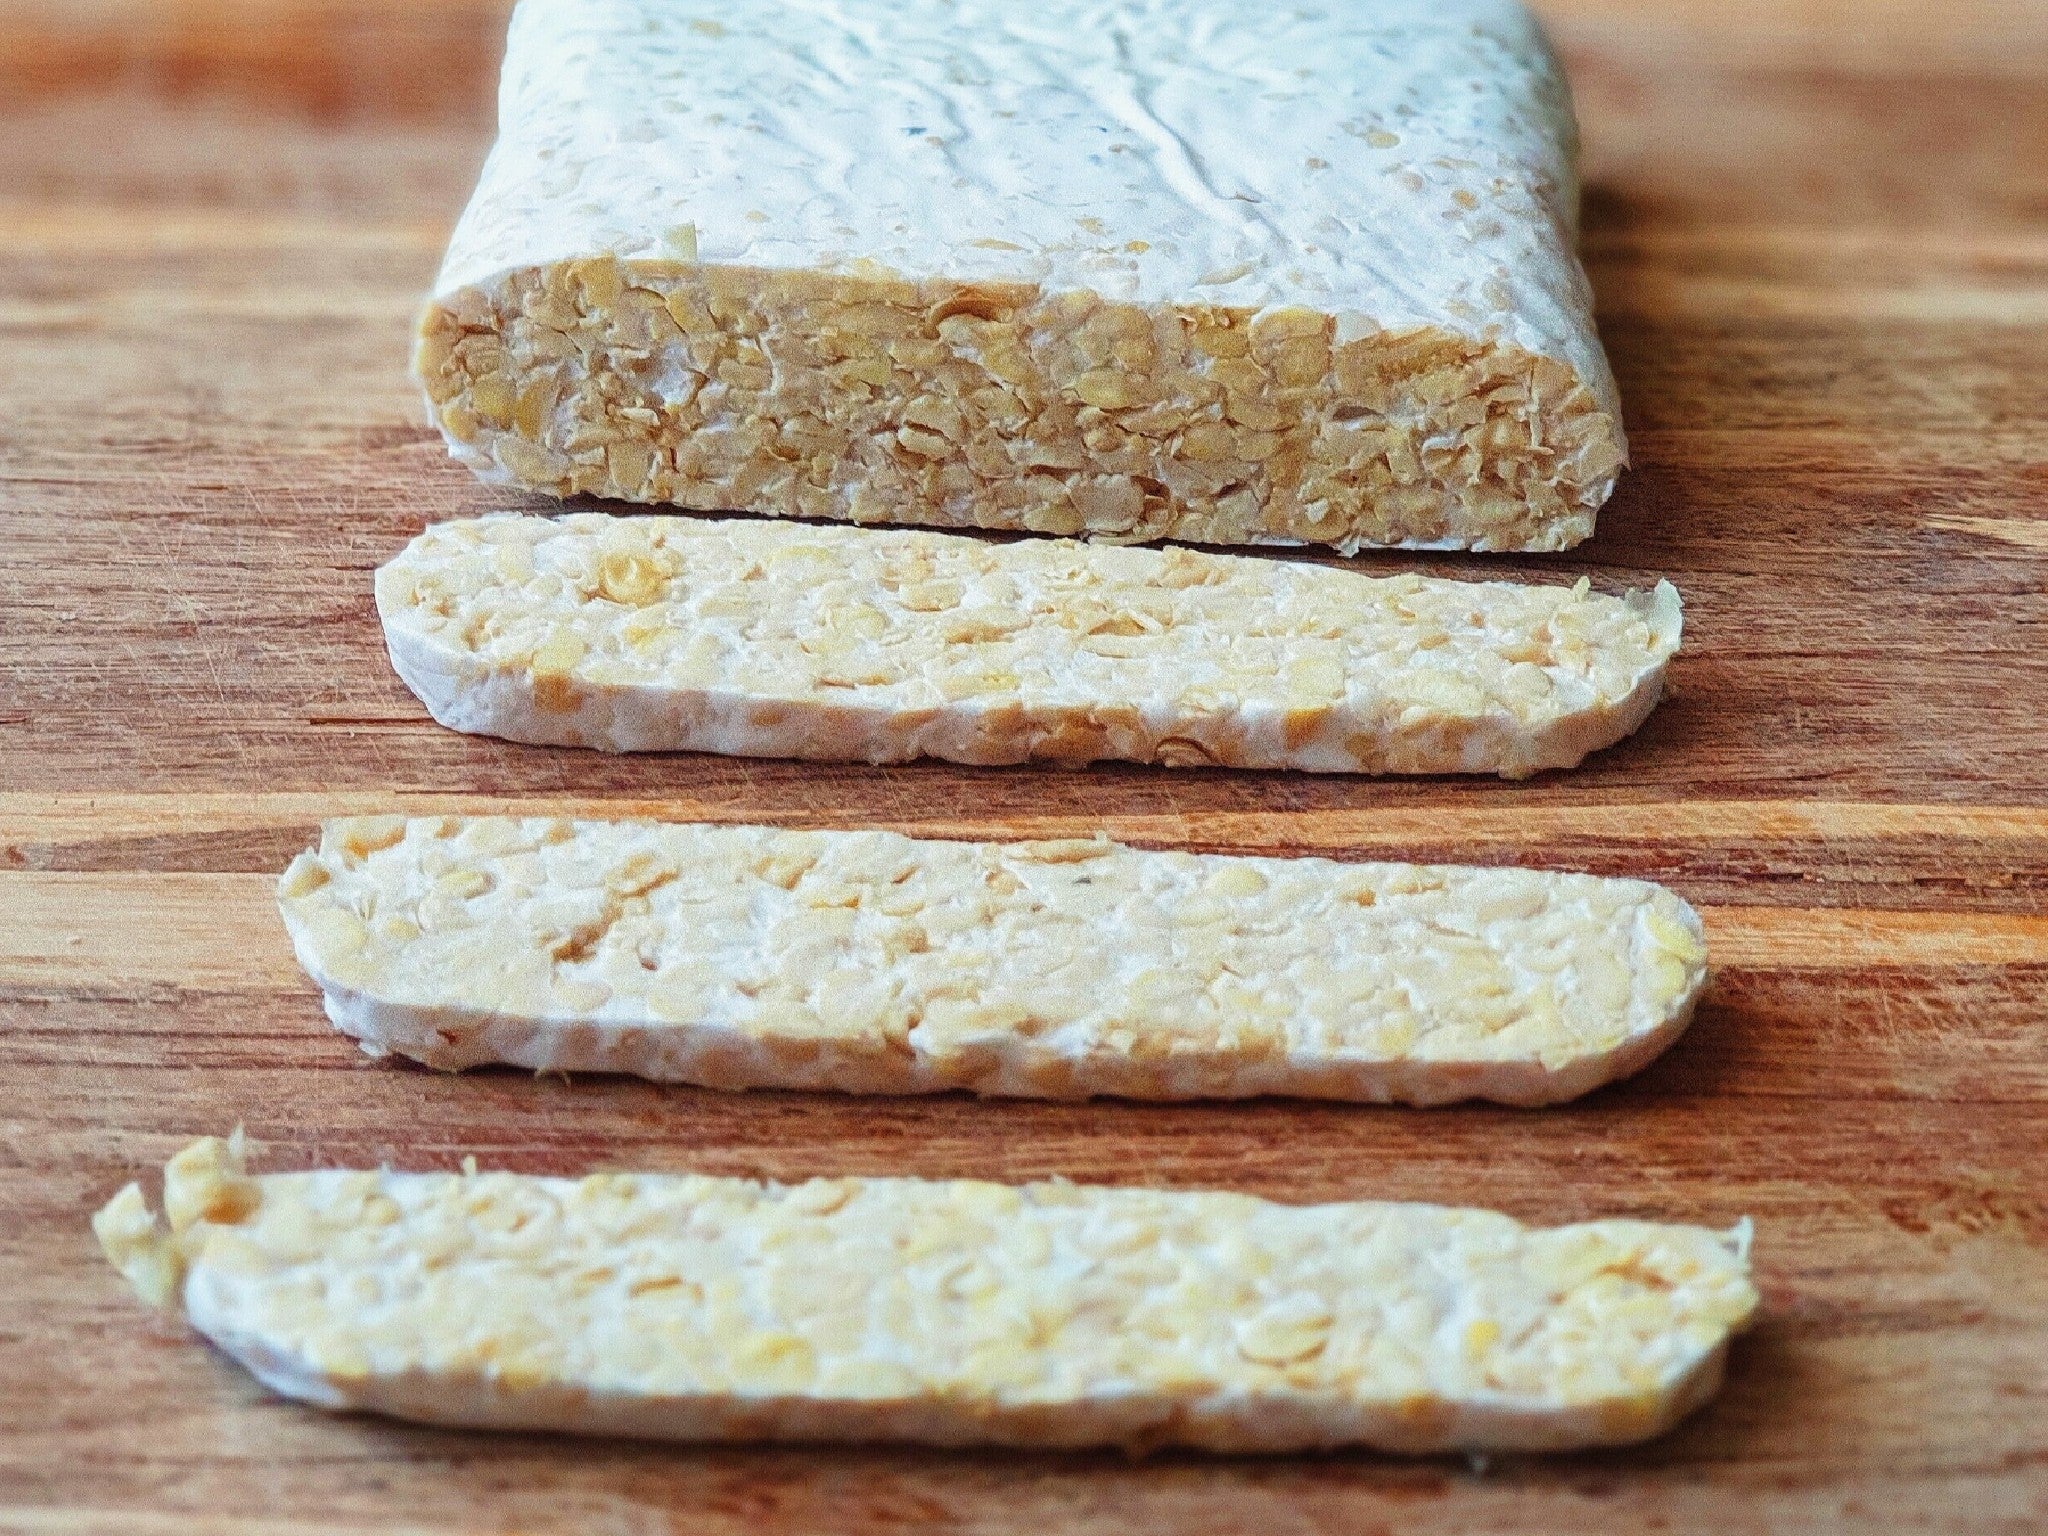 Tempeh Meades frozen traditional soya bean tempeh indybest.jpg